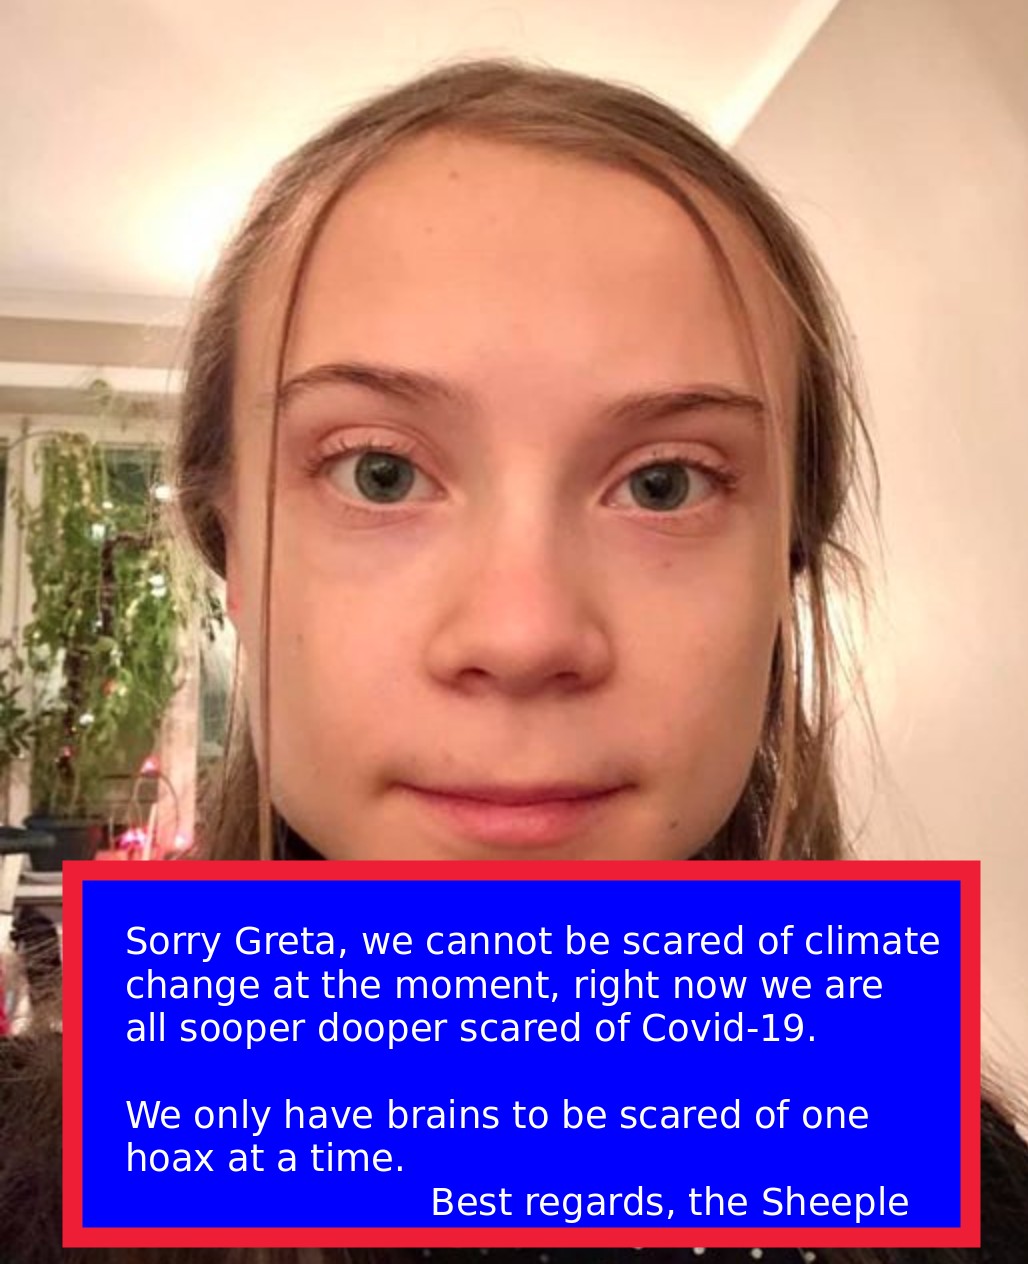 Sorry Greta Thunberg - we cannot be scare of climate change right now